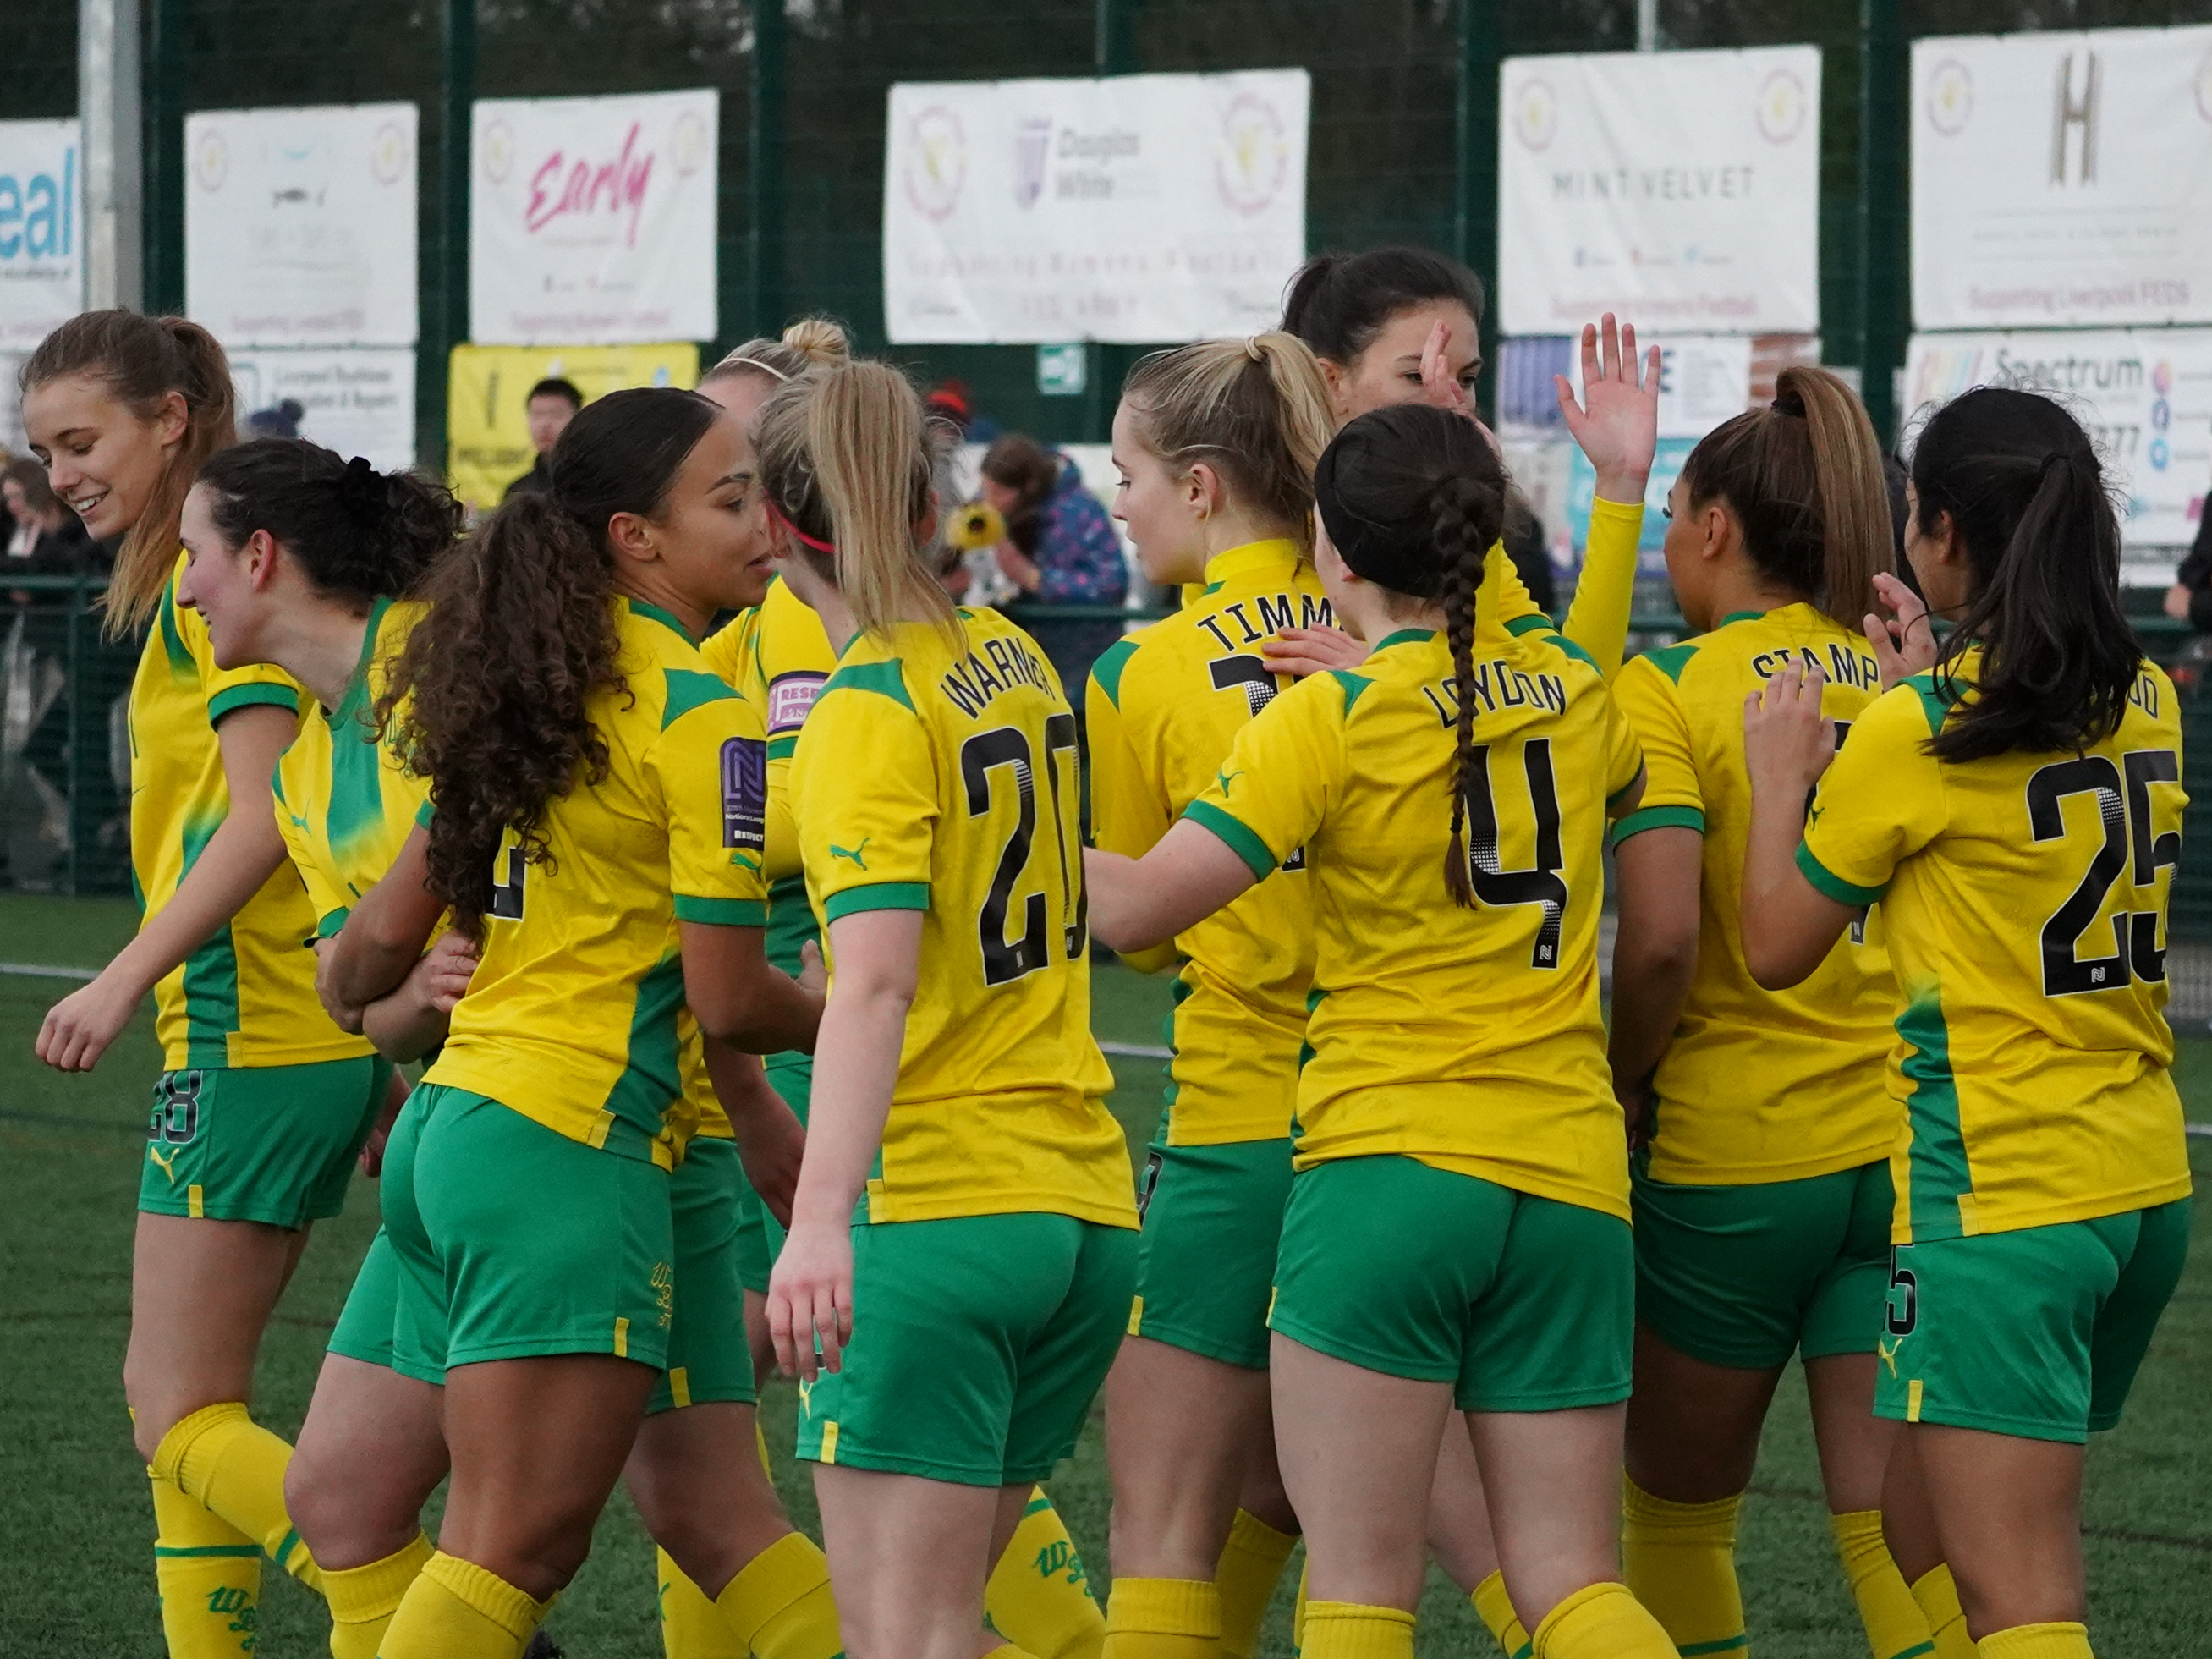 An image of the Albion Women team celebrating a goal